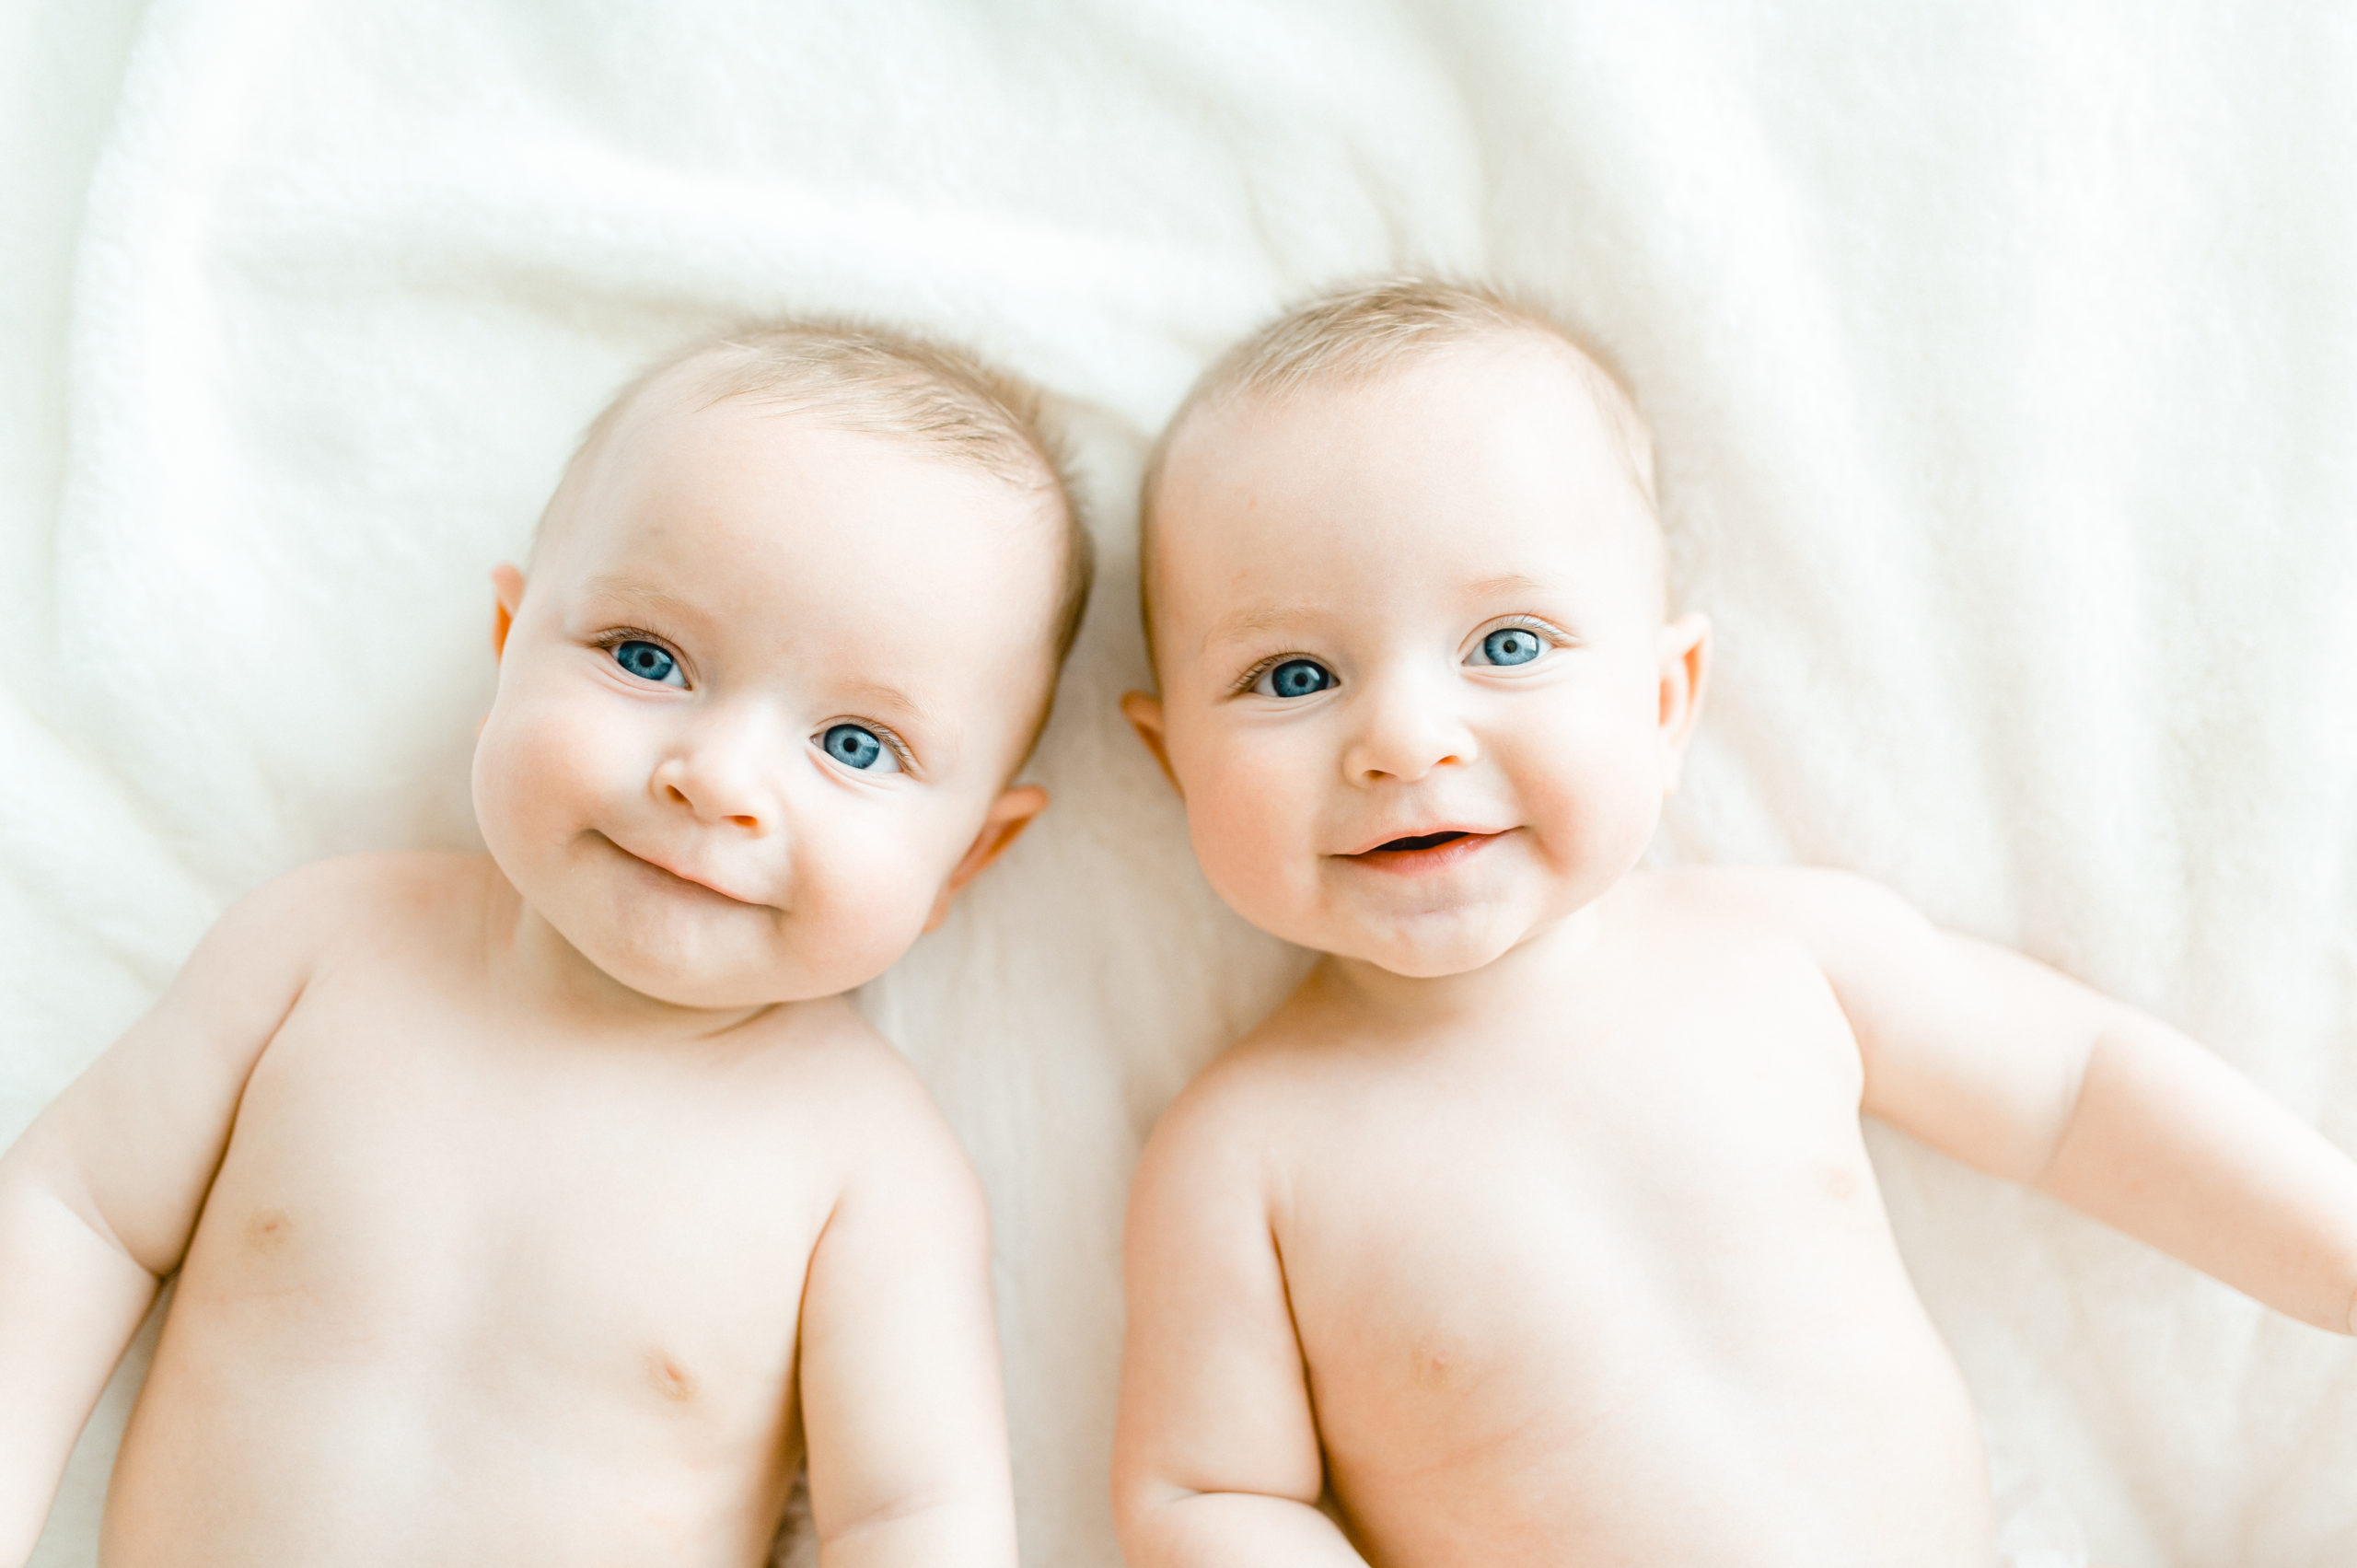 Twin 6 month old boys lay on white blanket smiling